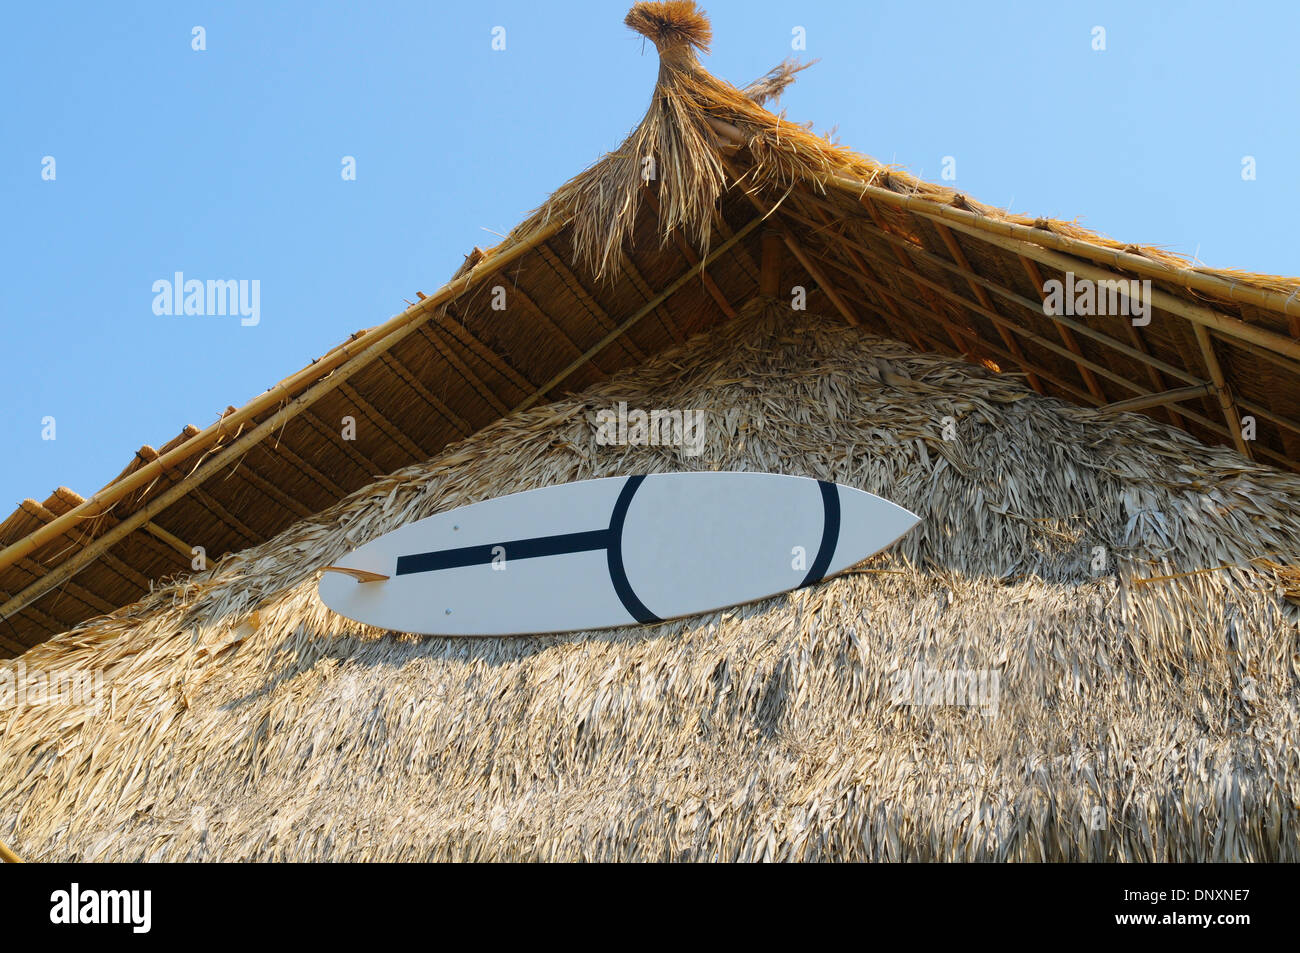 Surfboard on the roof. Stock Photo